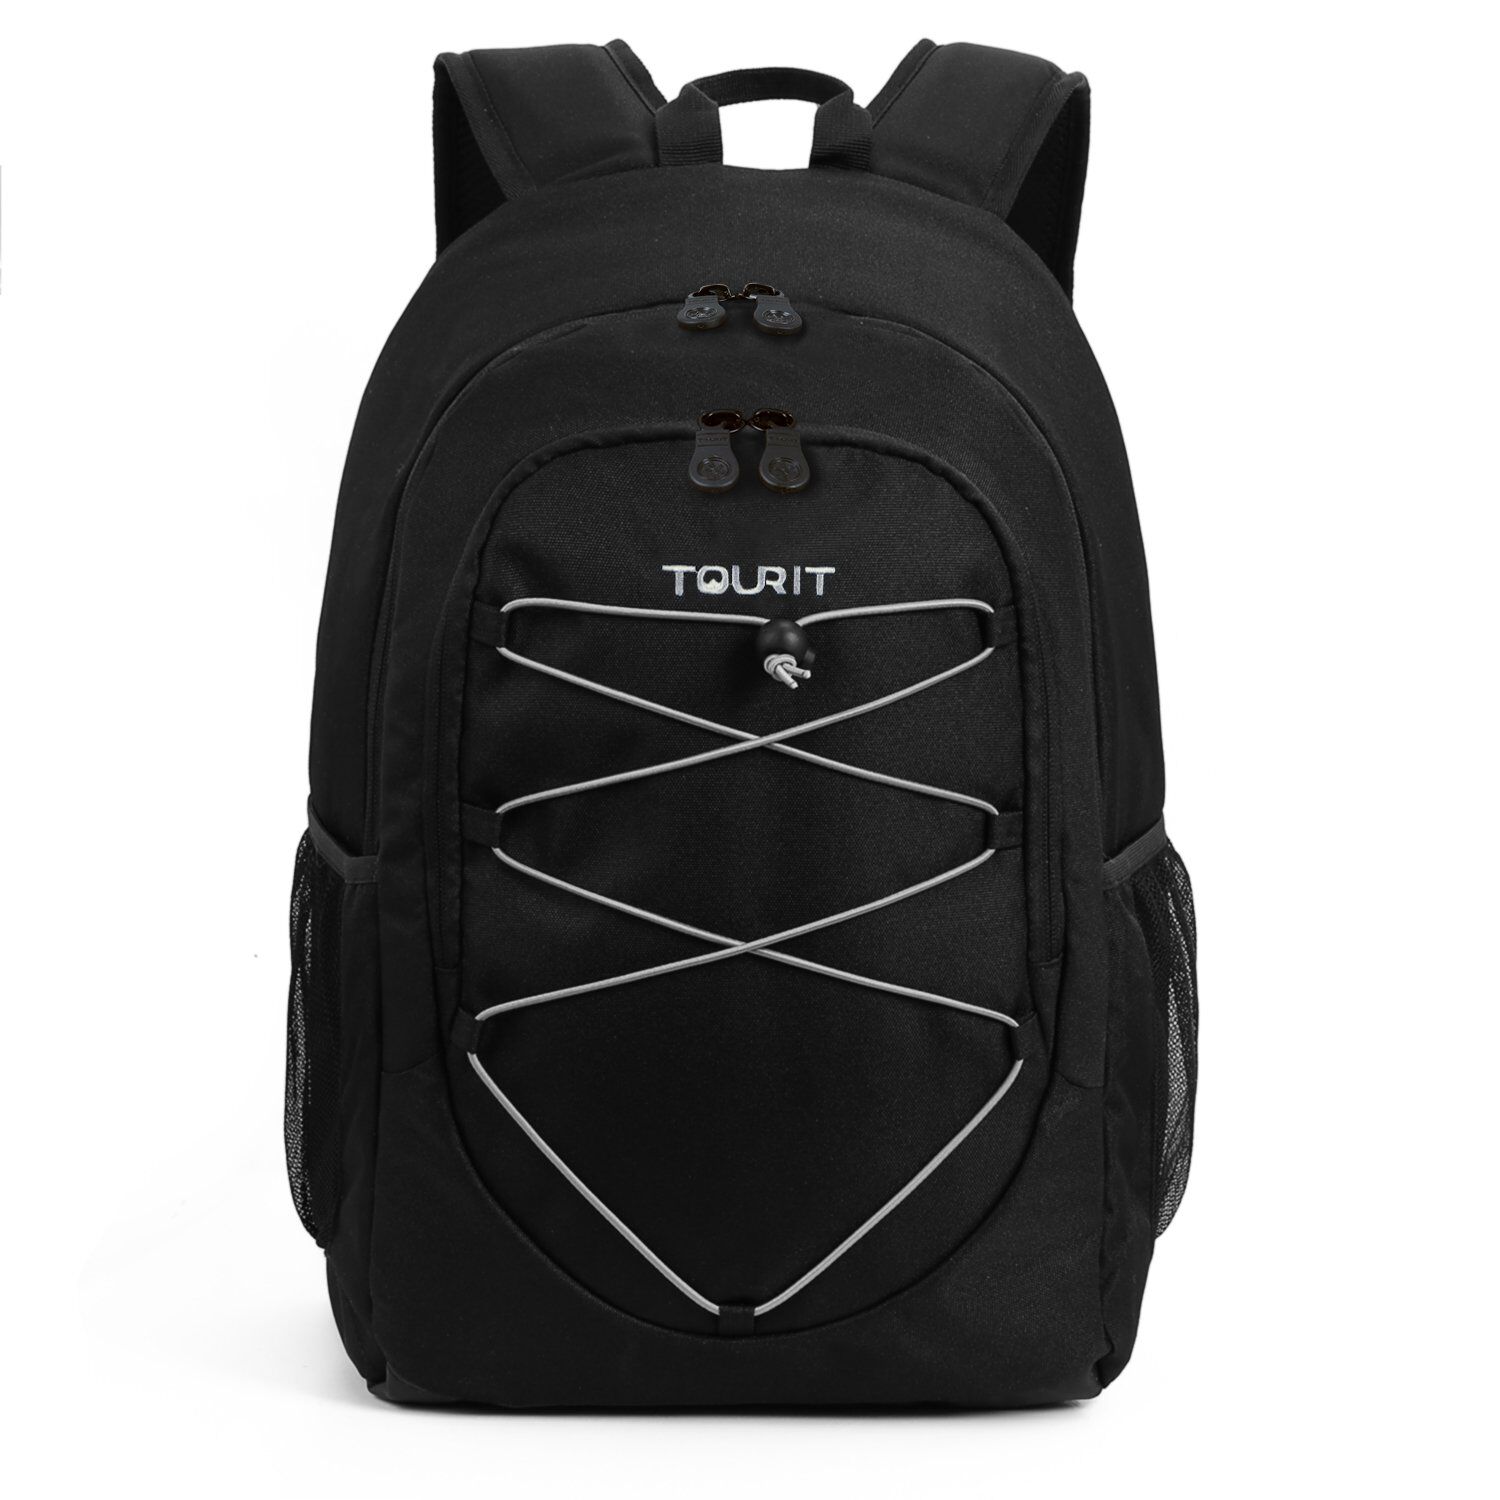 Tourit Loon - Backpack Cooler